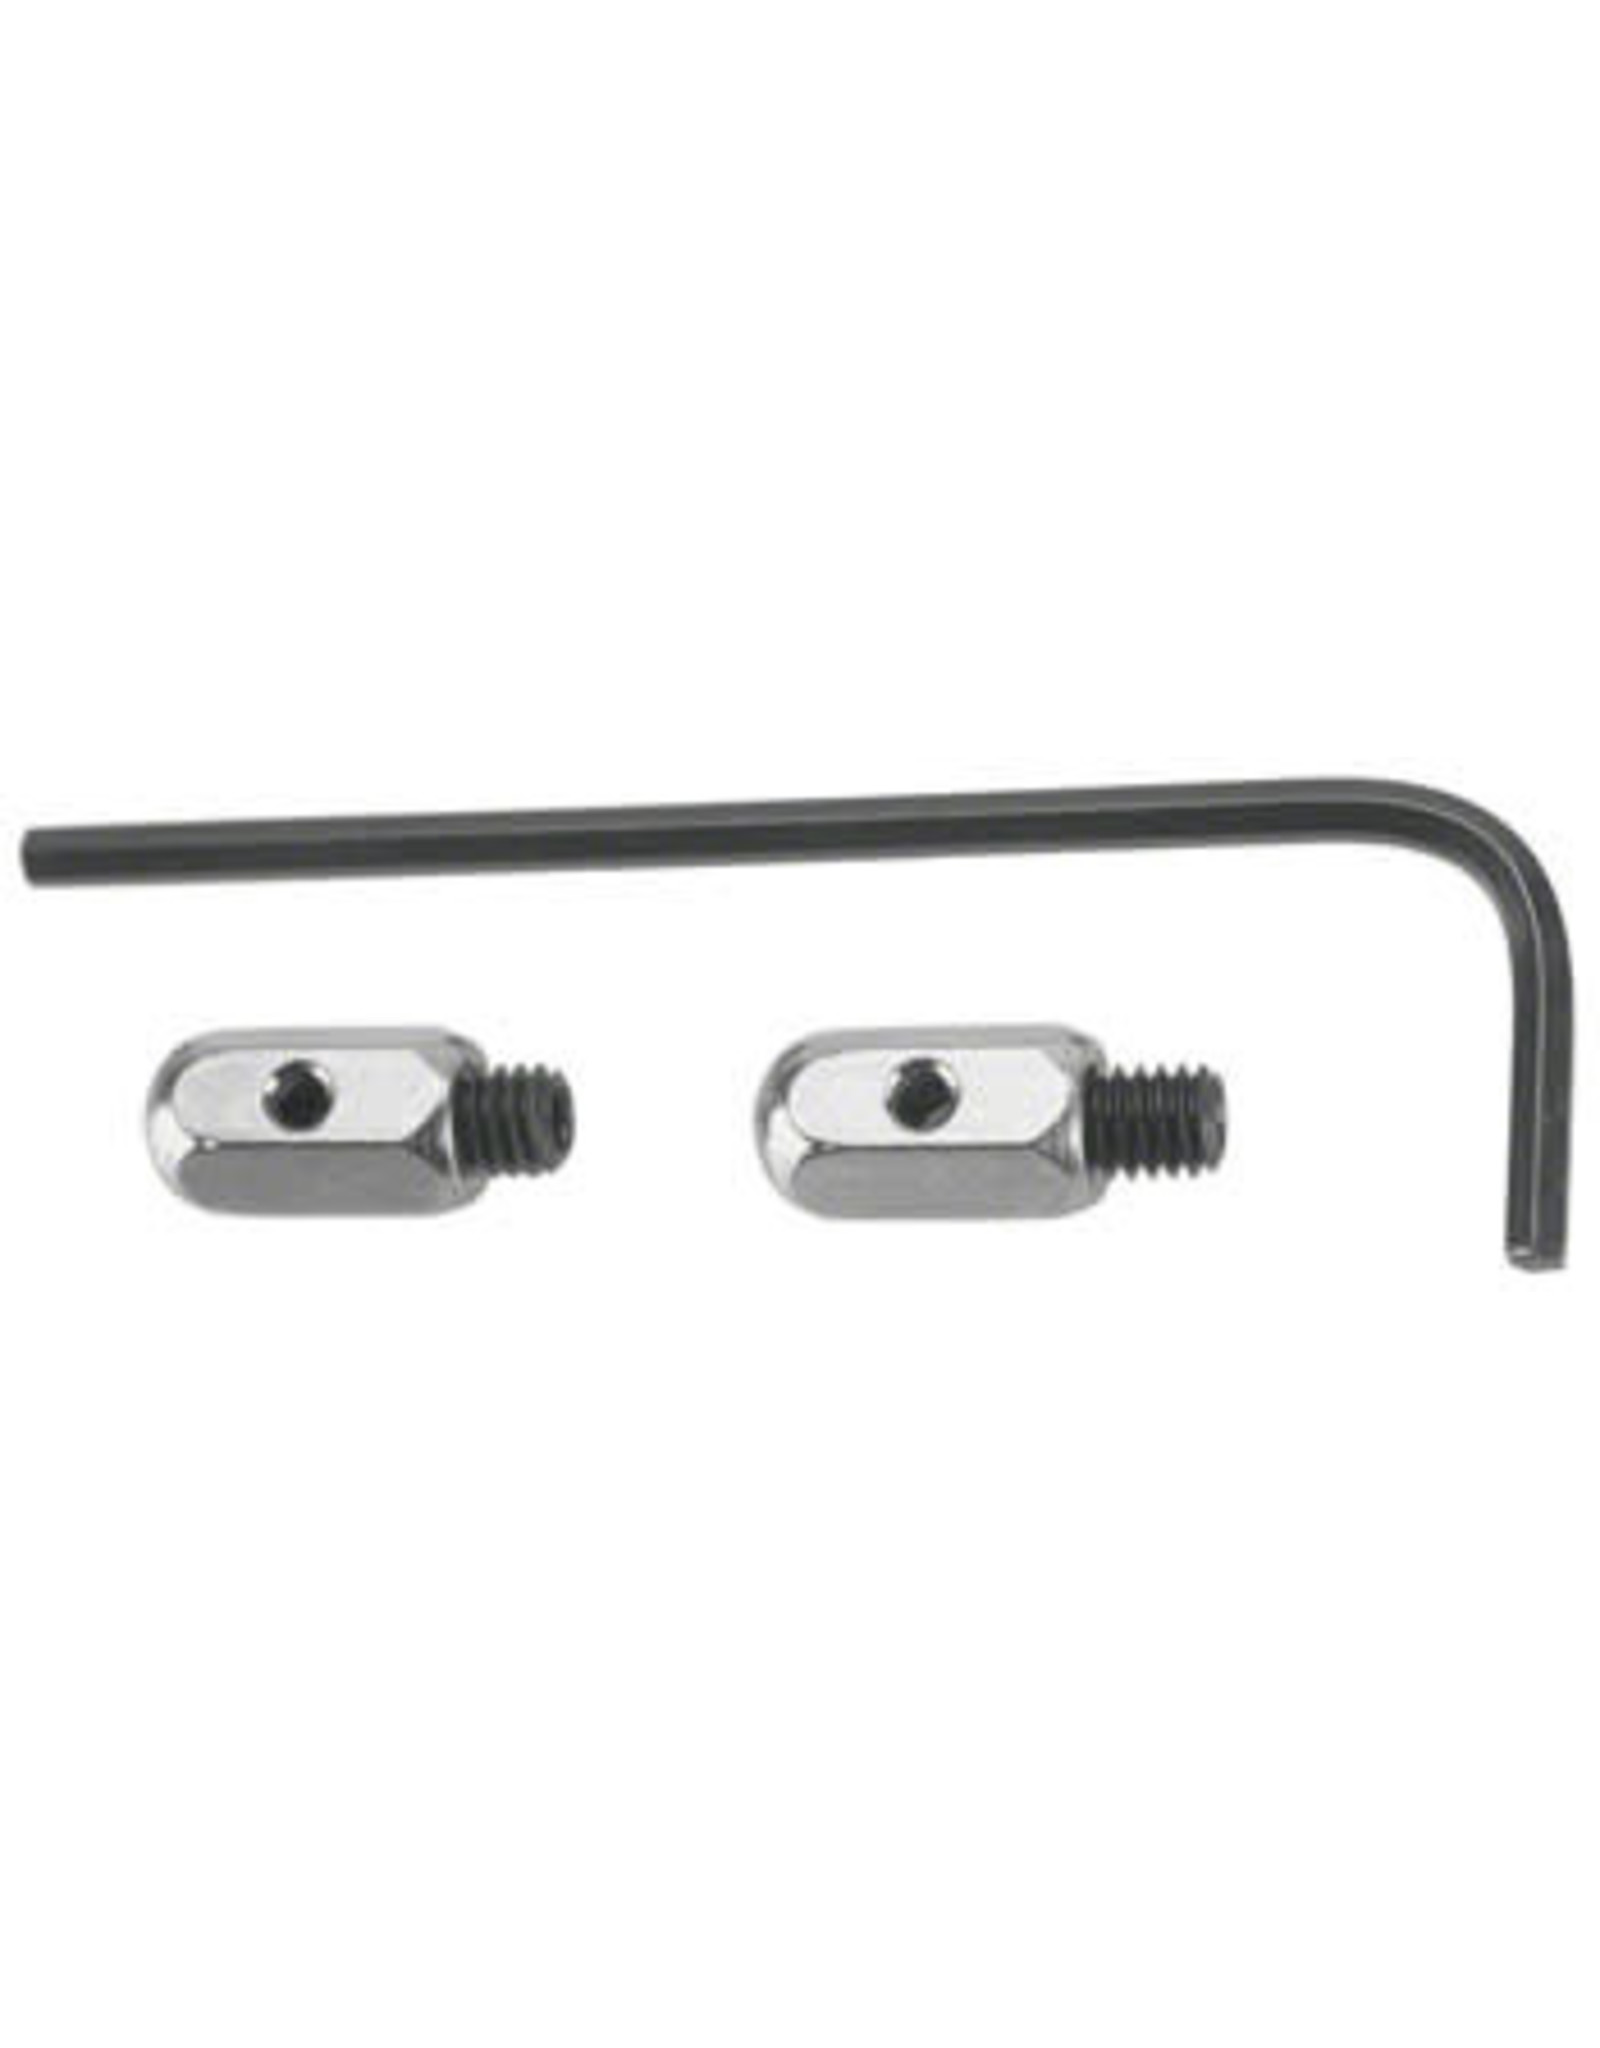 Odyssey Odyssey Knarps, Slip-Free Cable Anchors, Pair